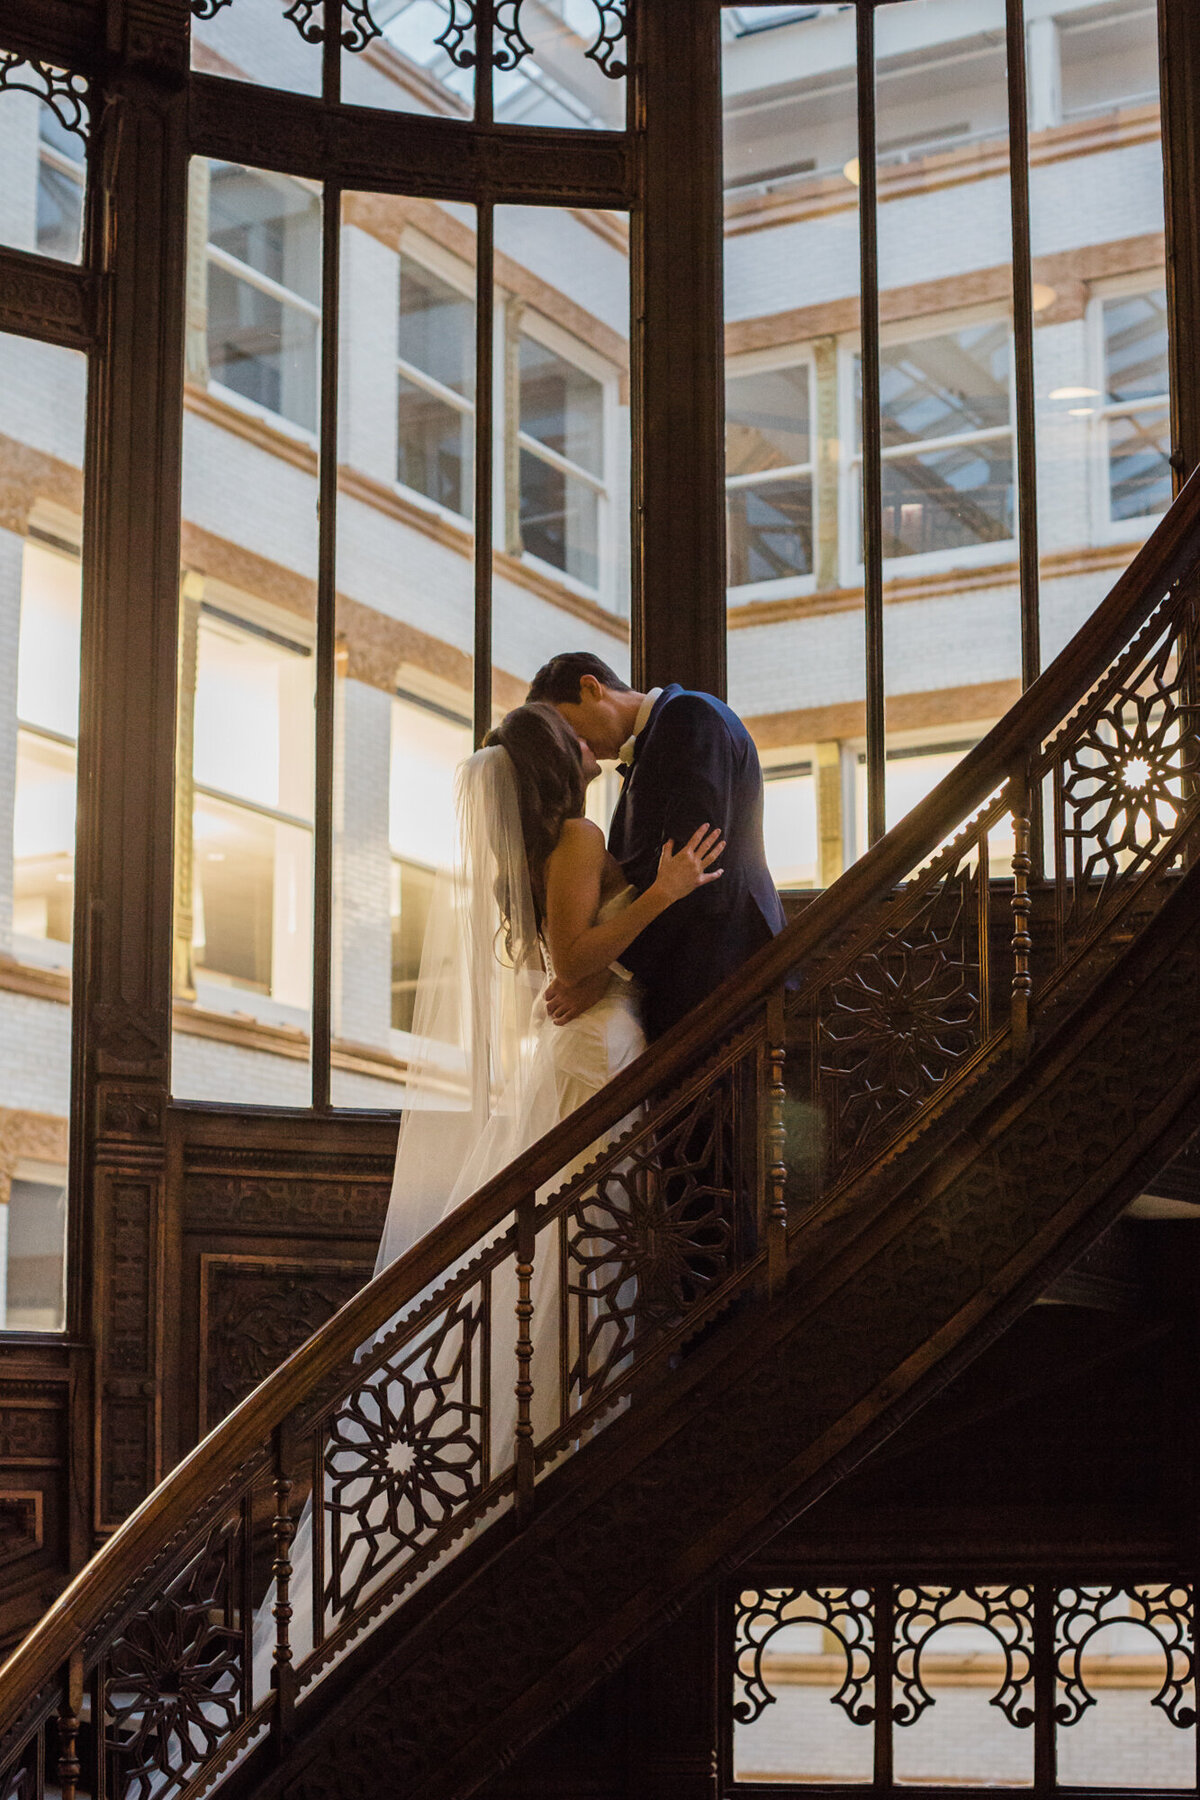 Newlyweds share a kiss in the historic staircase designed by Frank Lloyd Wright at the Rookery in Chicago